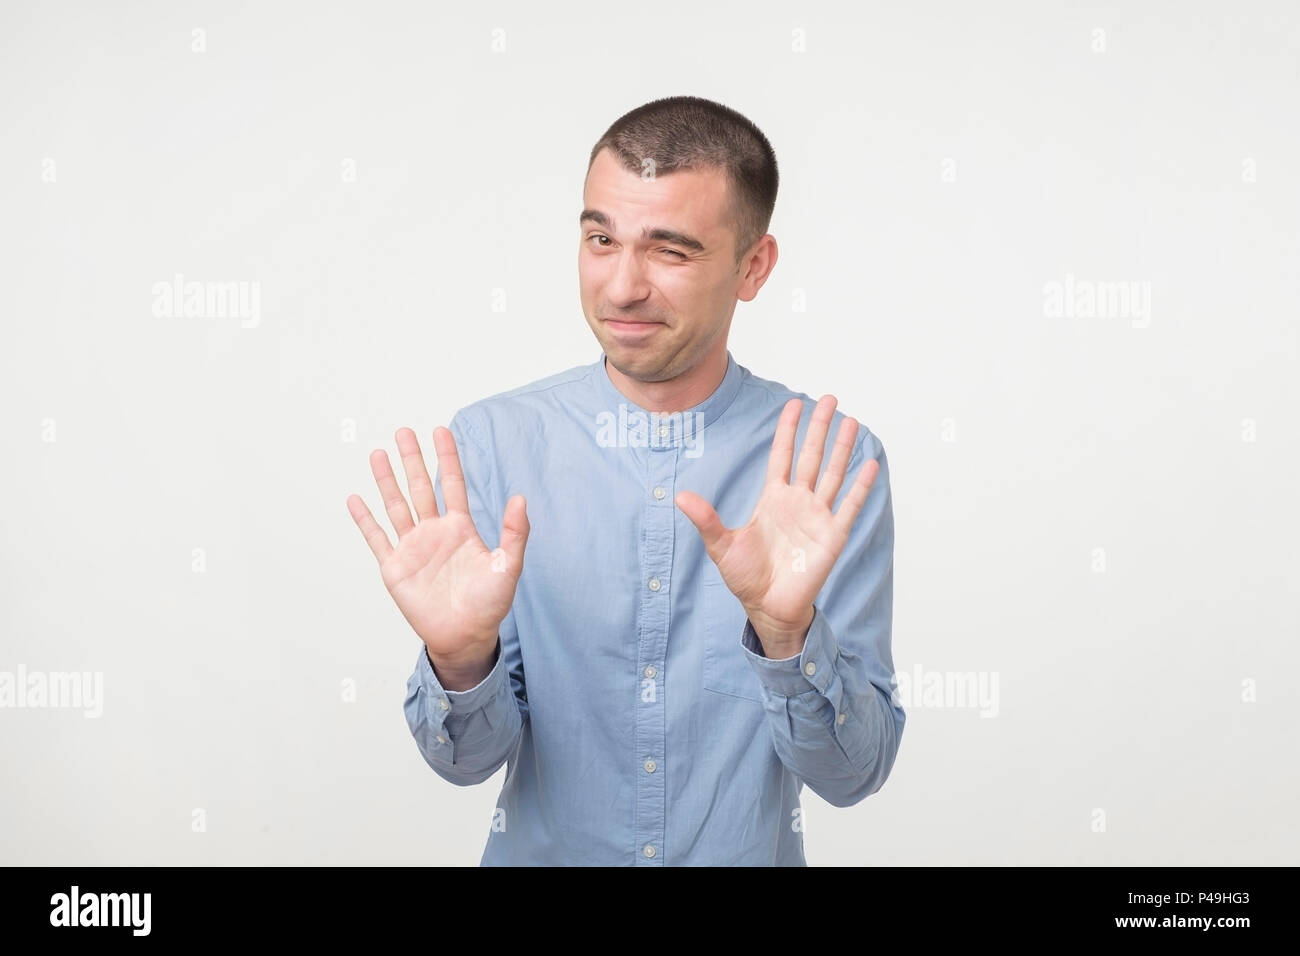 Portrait of attractive man showing hold on gesture with raised palms and smiling, standing over gray background. Wait a sec, everything happened diffe Stock Photo